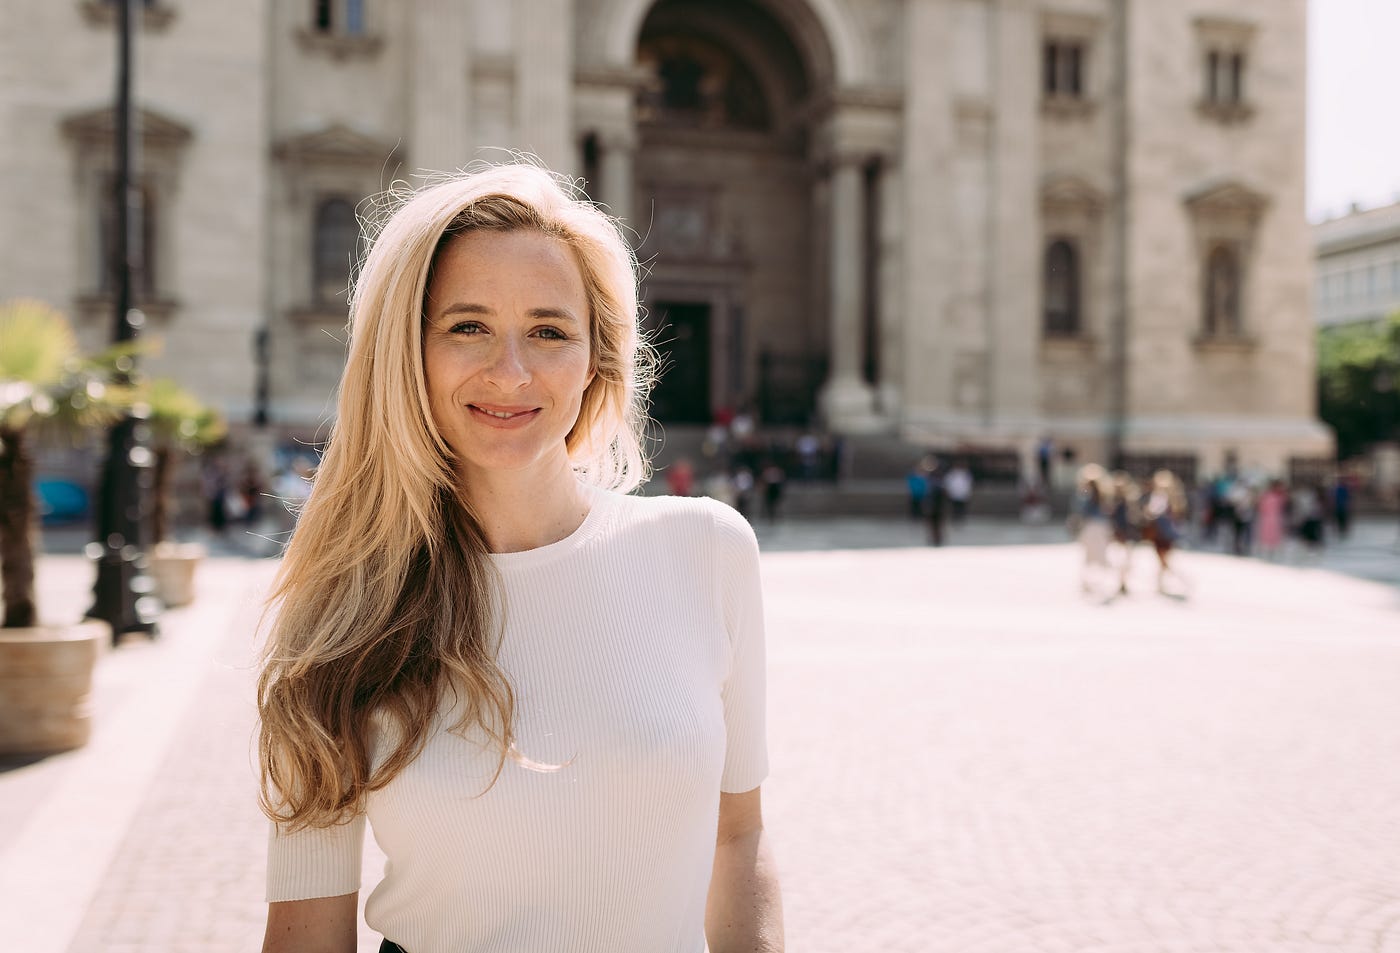 Mom Sextech - Sextech Expert Bryony Cole On How To Rise Above Stigma and Taboo | by Laura  Bosch | Entrepreneur's Handbook